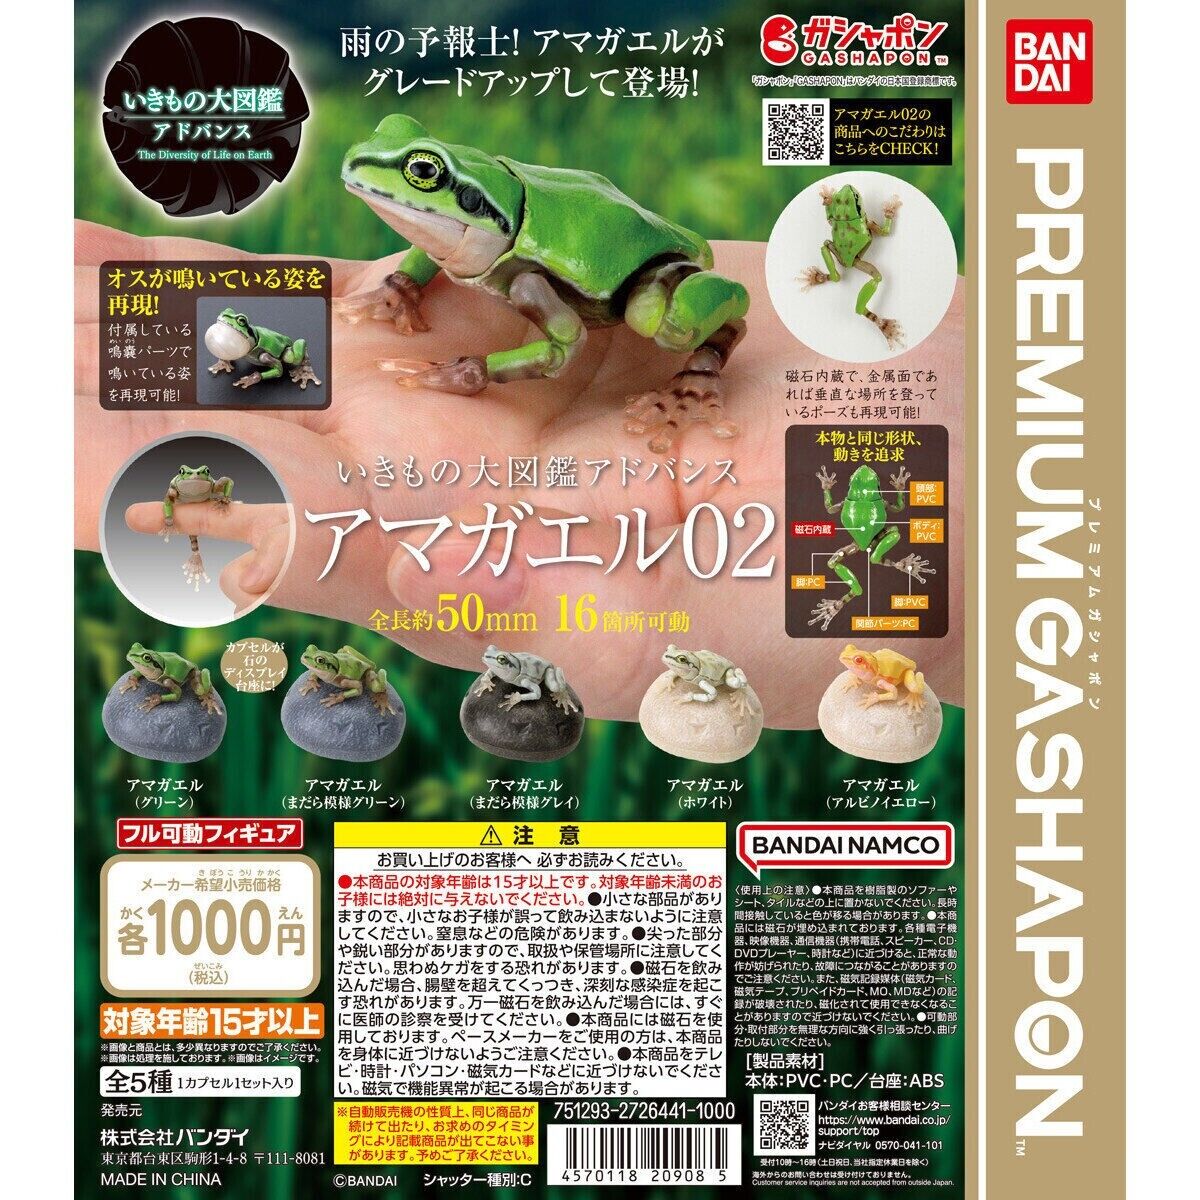 Big Book of Living Things Advance: Tree Frog 02 Total 5 kinds complete BANDAI